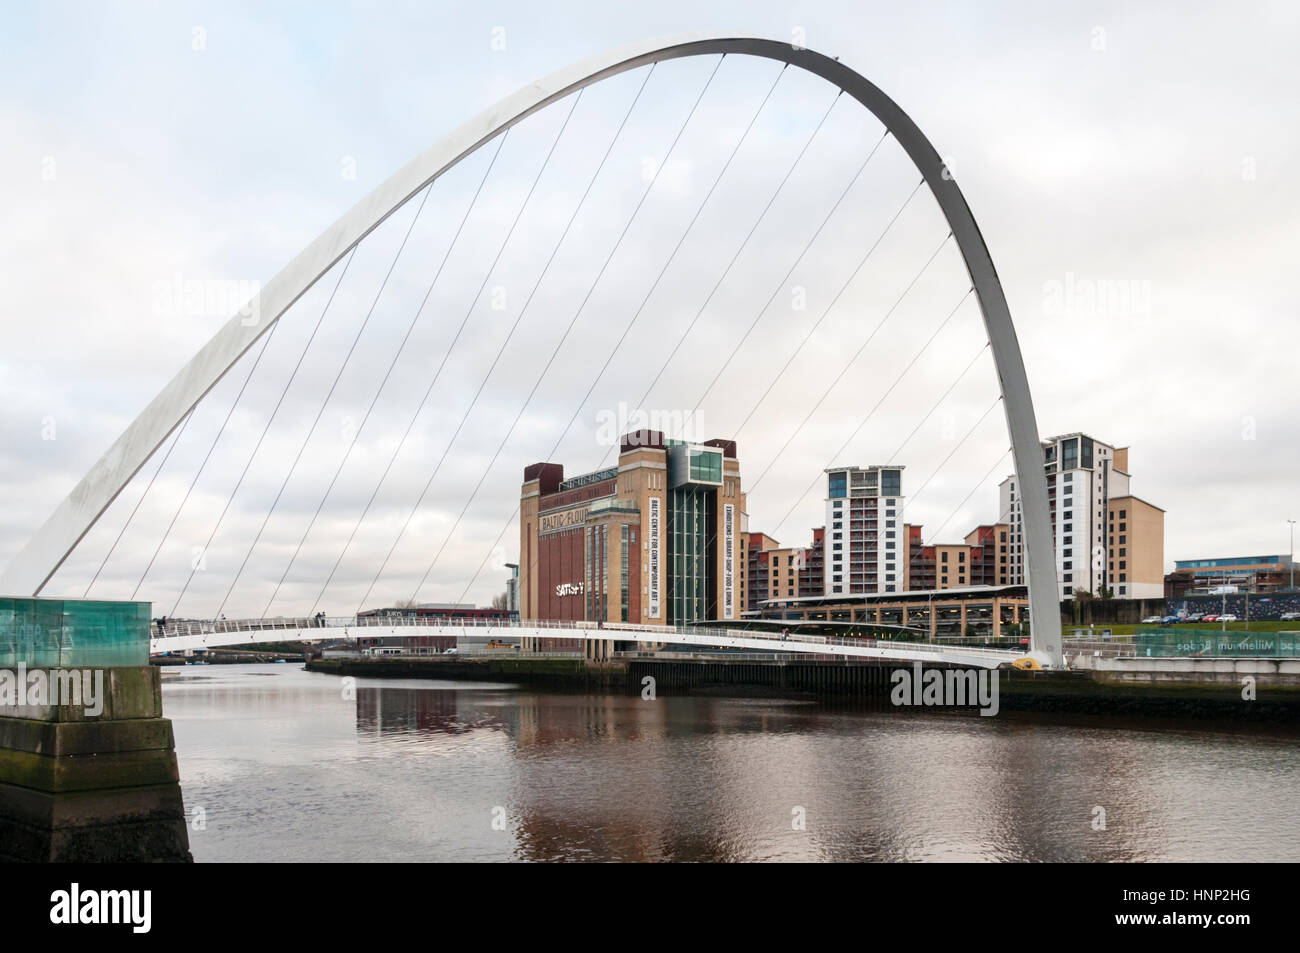 Gateshead Millennium Bridge over the River Tyne links Gateshead Quays and Baltic Centre on the south bank with Newcastle Quayside on the north bank.. Stock Photo